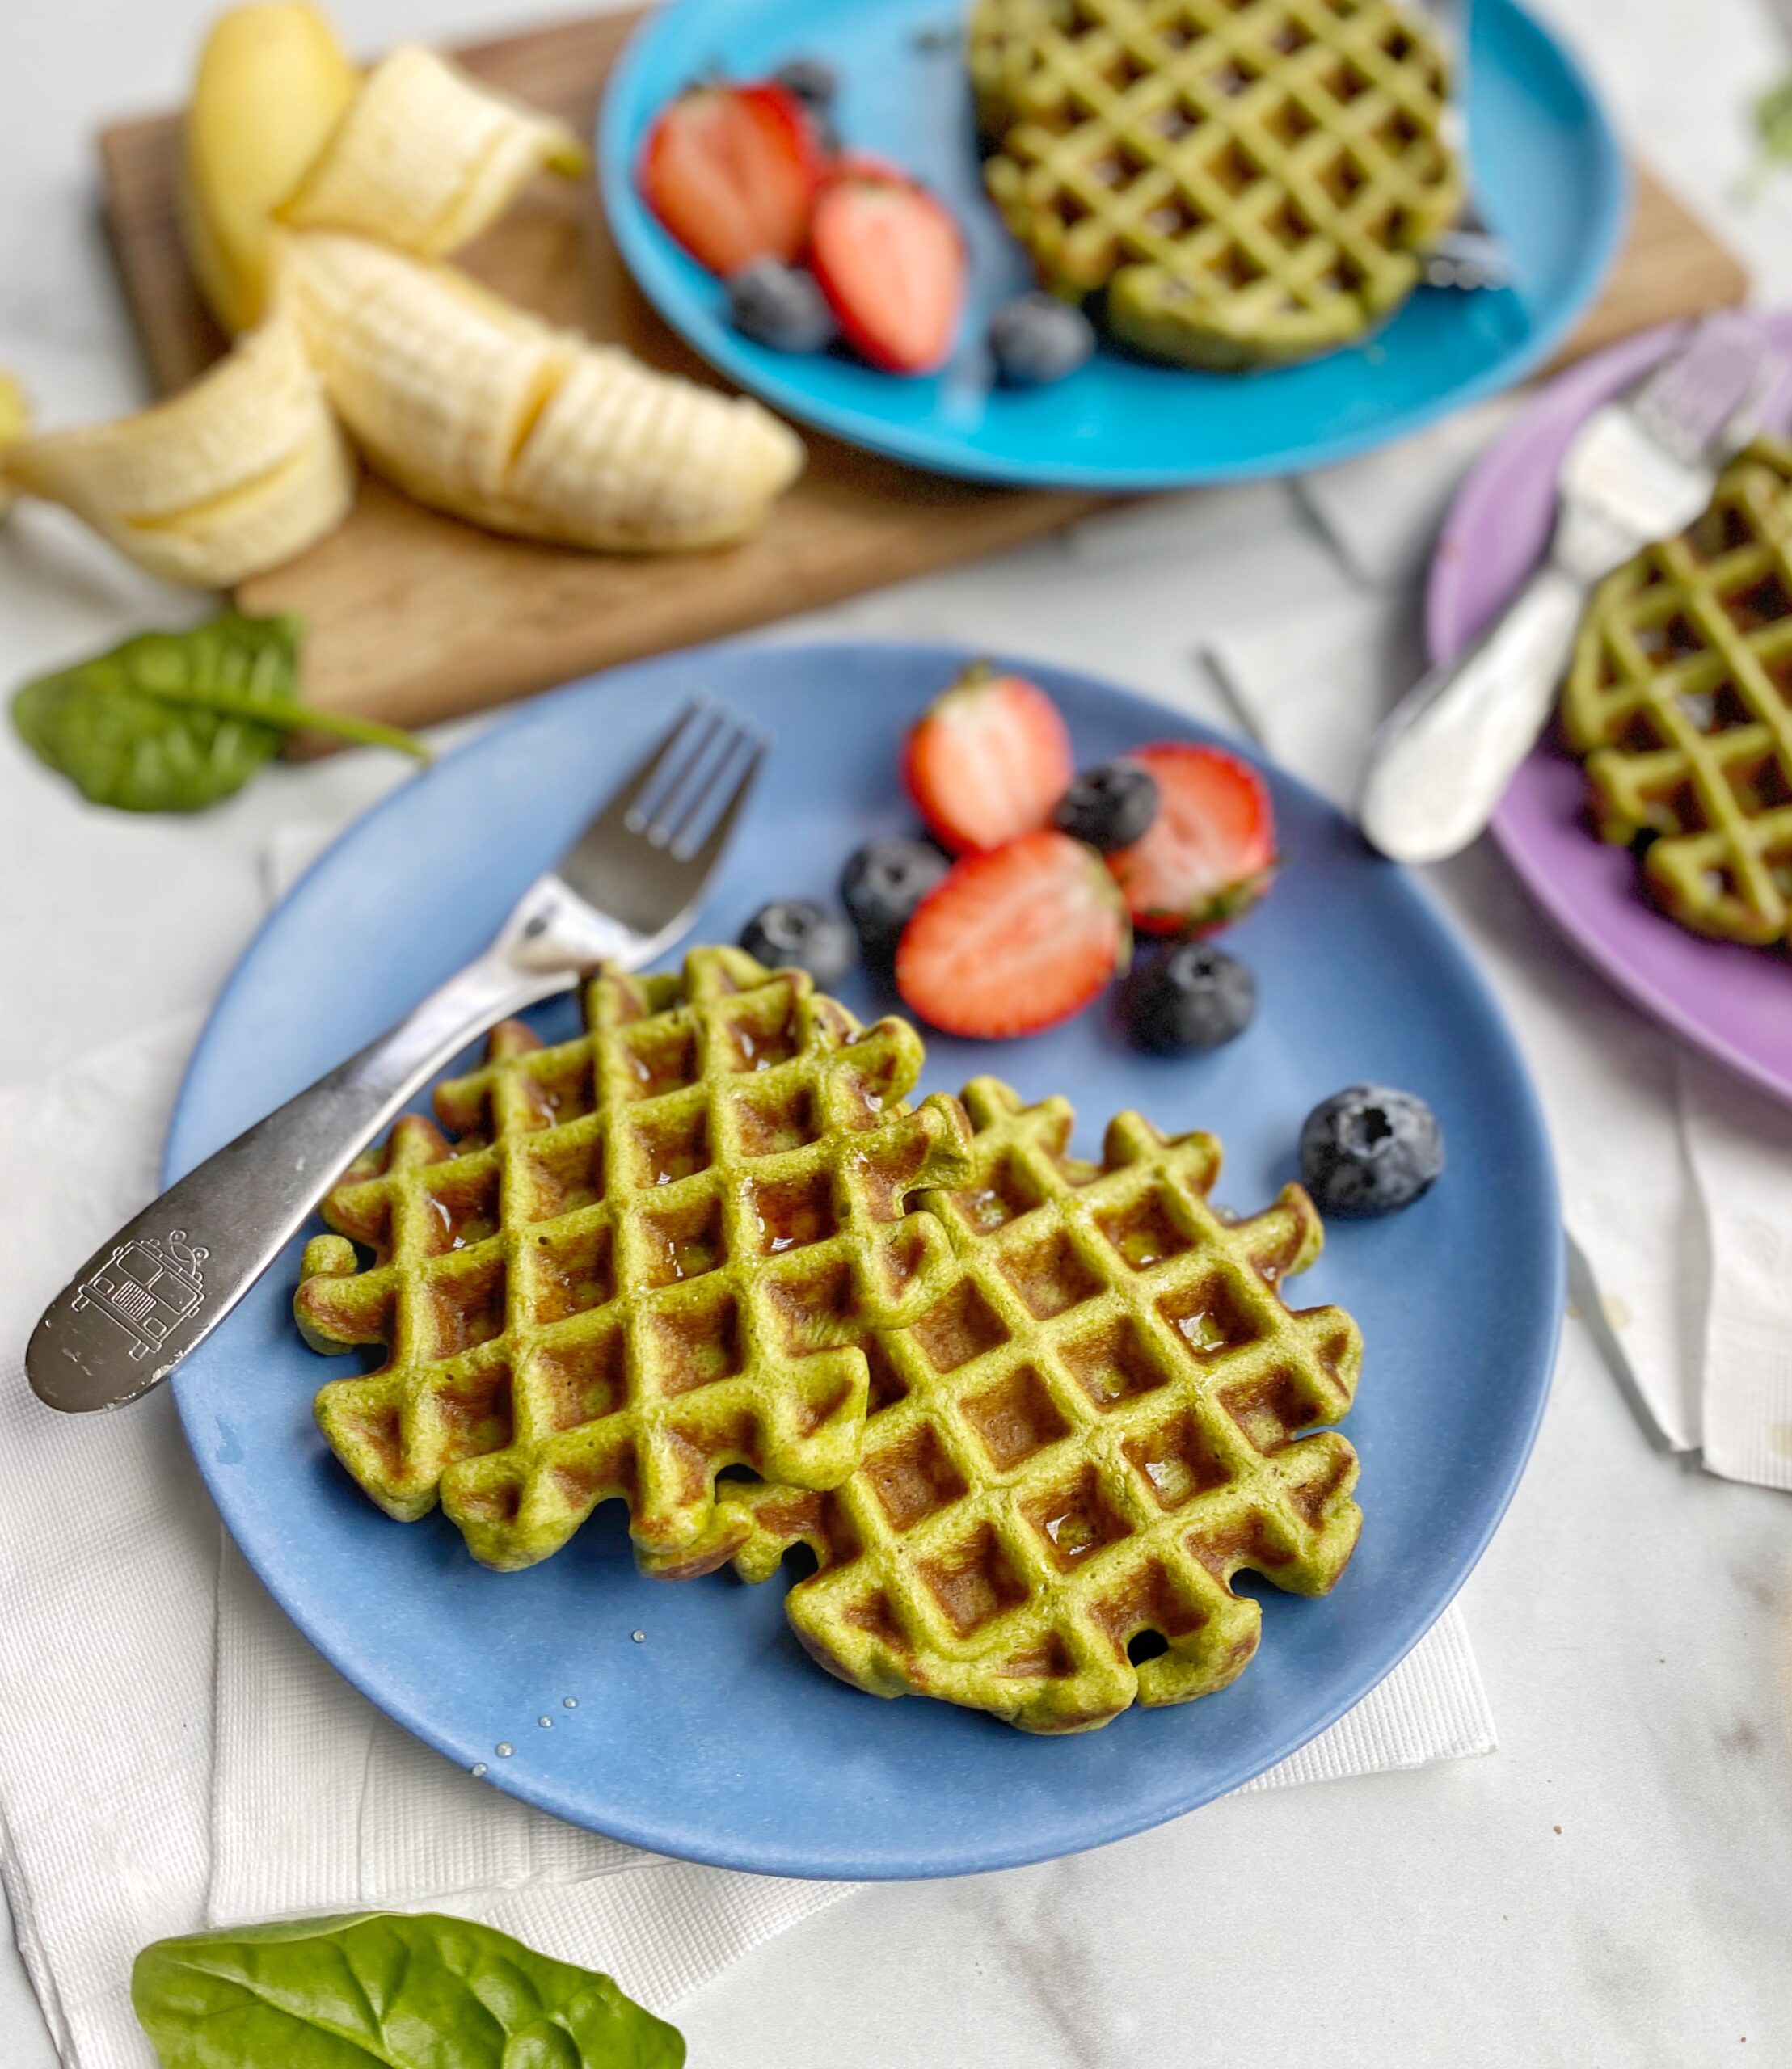 Spinach banana waffles on a blue plate with strawberries and blueberries also on the plate. Another plate with waffles and fruit slightly out of frame. A banana on a cutting board surrounding the plates on a counter. 